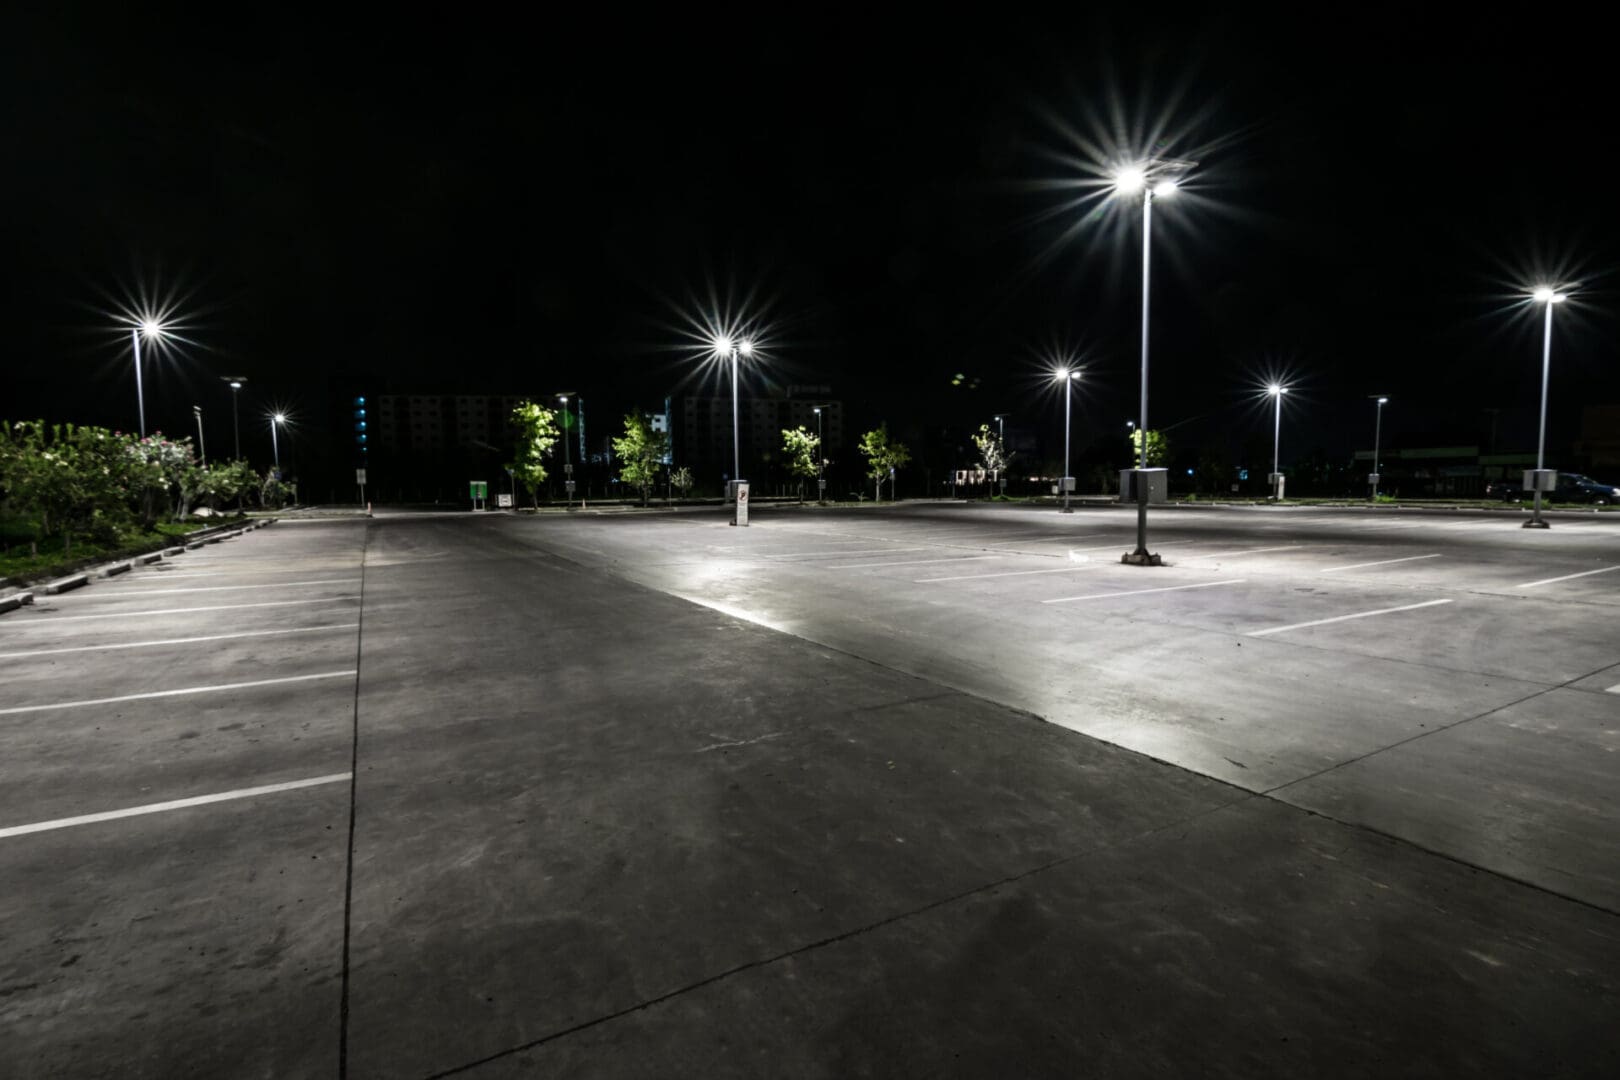 A parking lot with street lights at night.